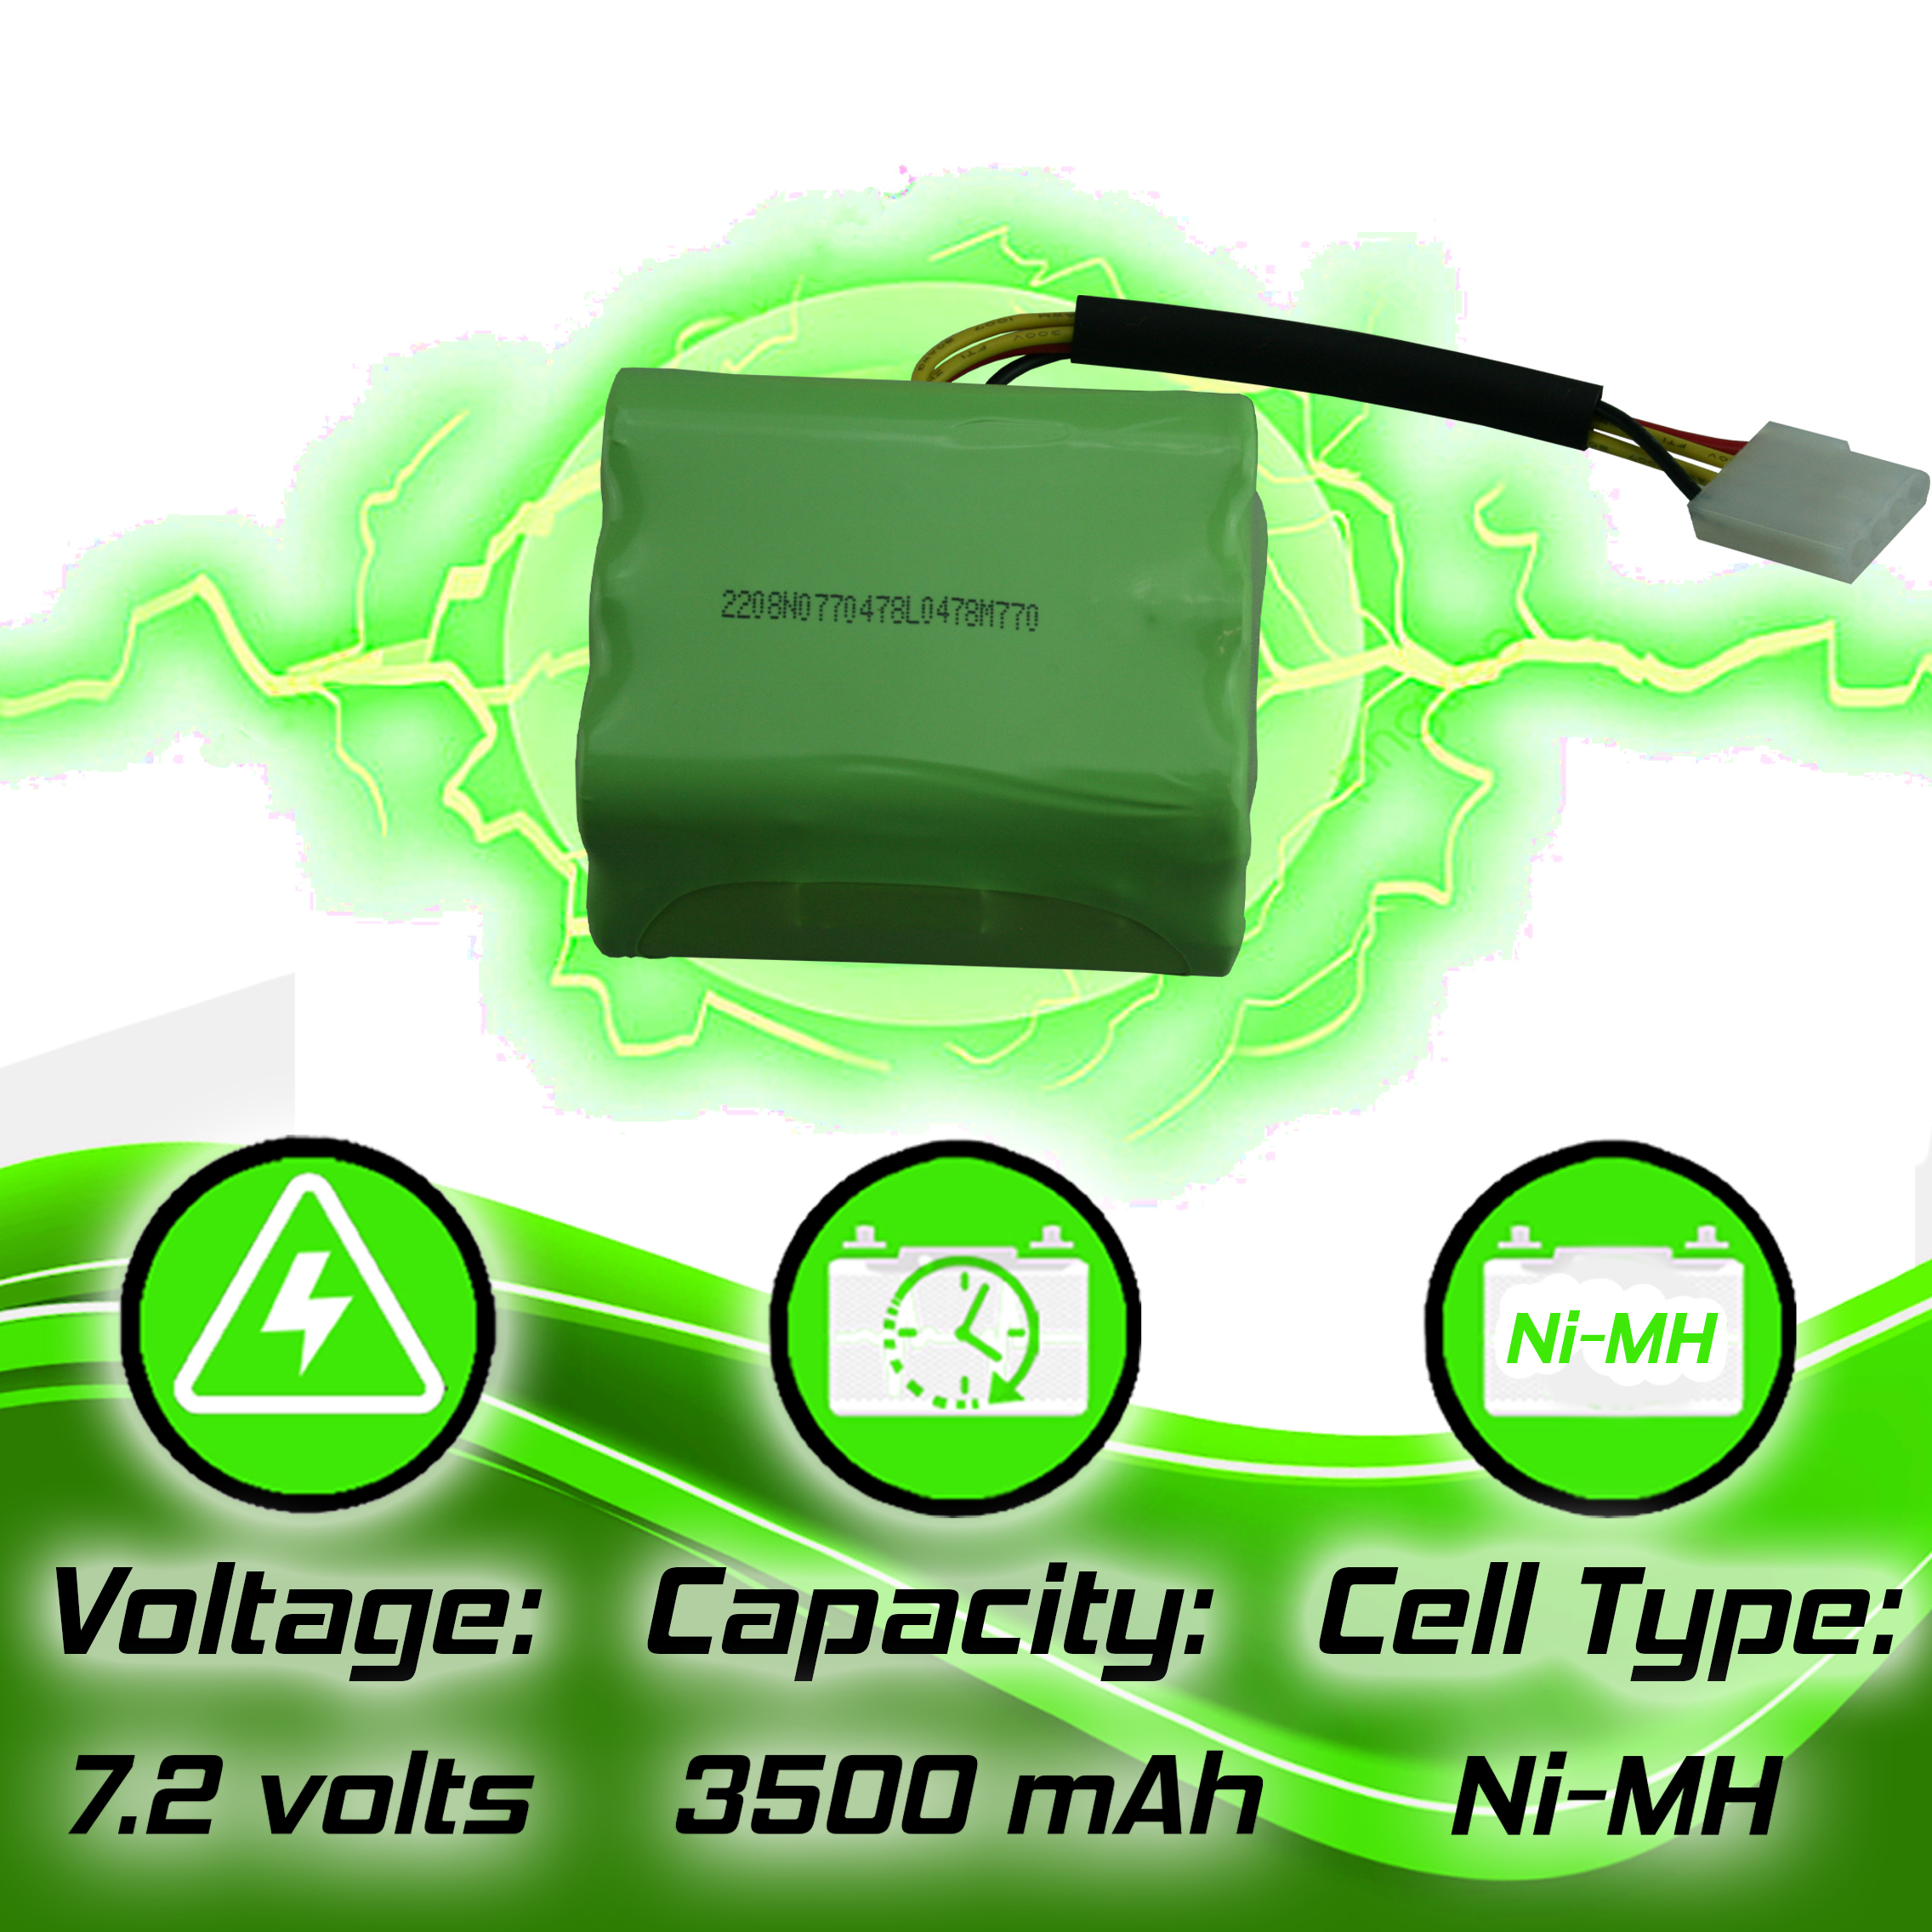 7.2v Ni-MH Neato & Vorwerk Robot Vacuums Replacement Battery For 945-0005, 945-0006, 205-0001, 945-0024